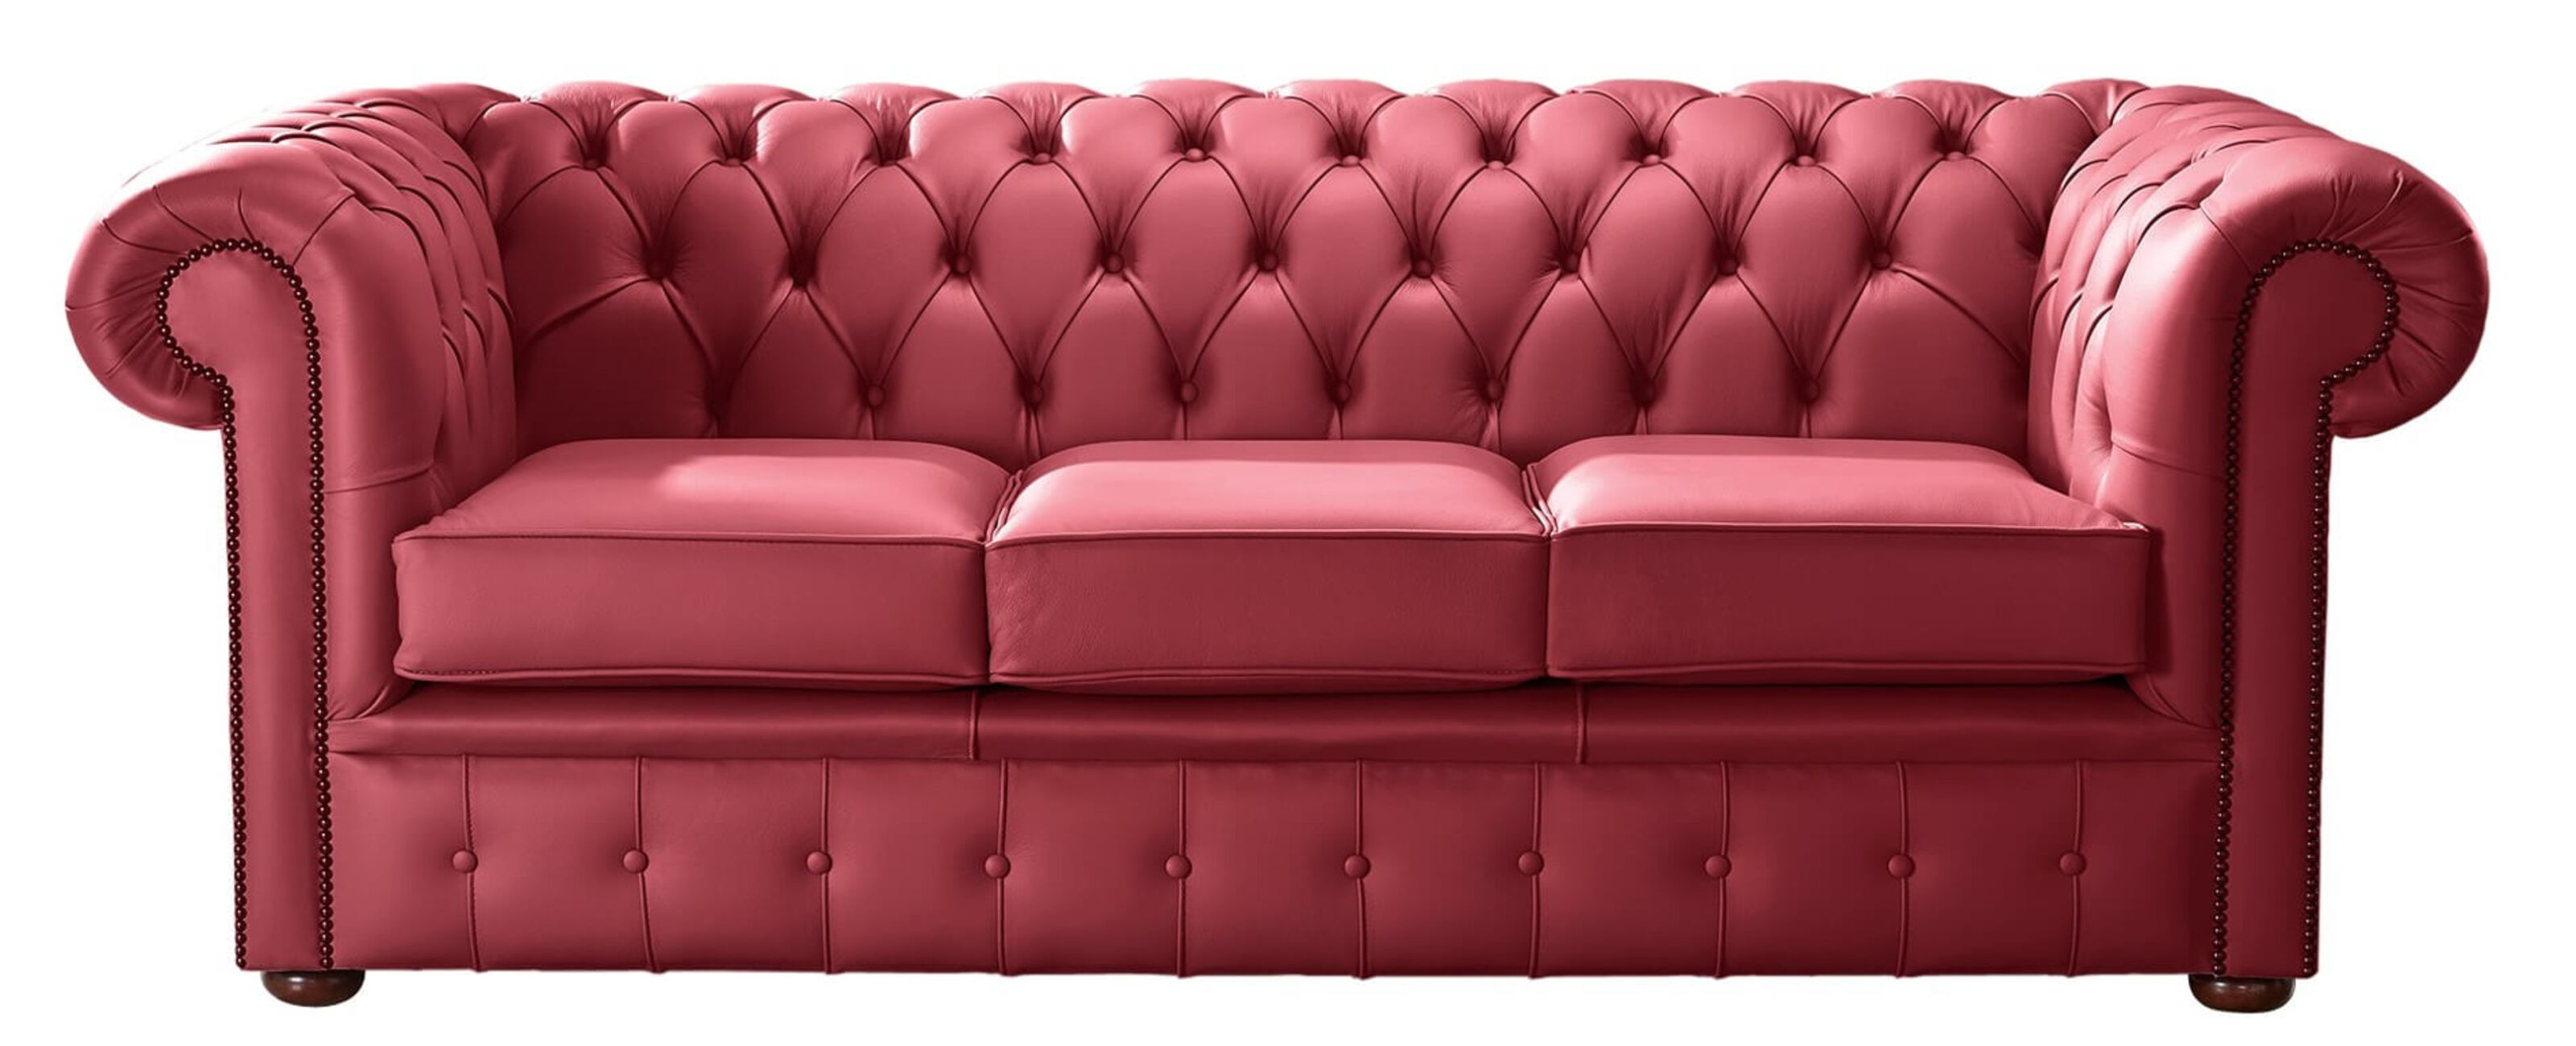 Your Guide to Finding the Perfect Chesterfield Sofas in West Yorkshire  %Post Title